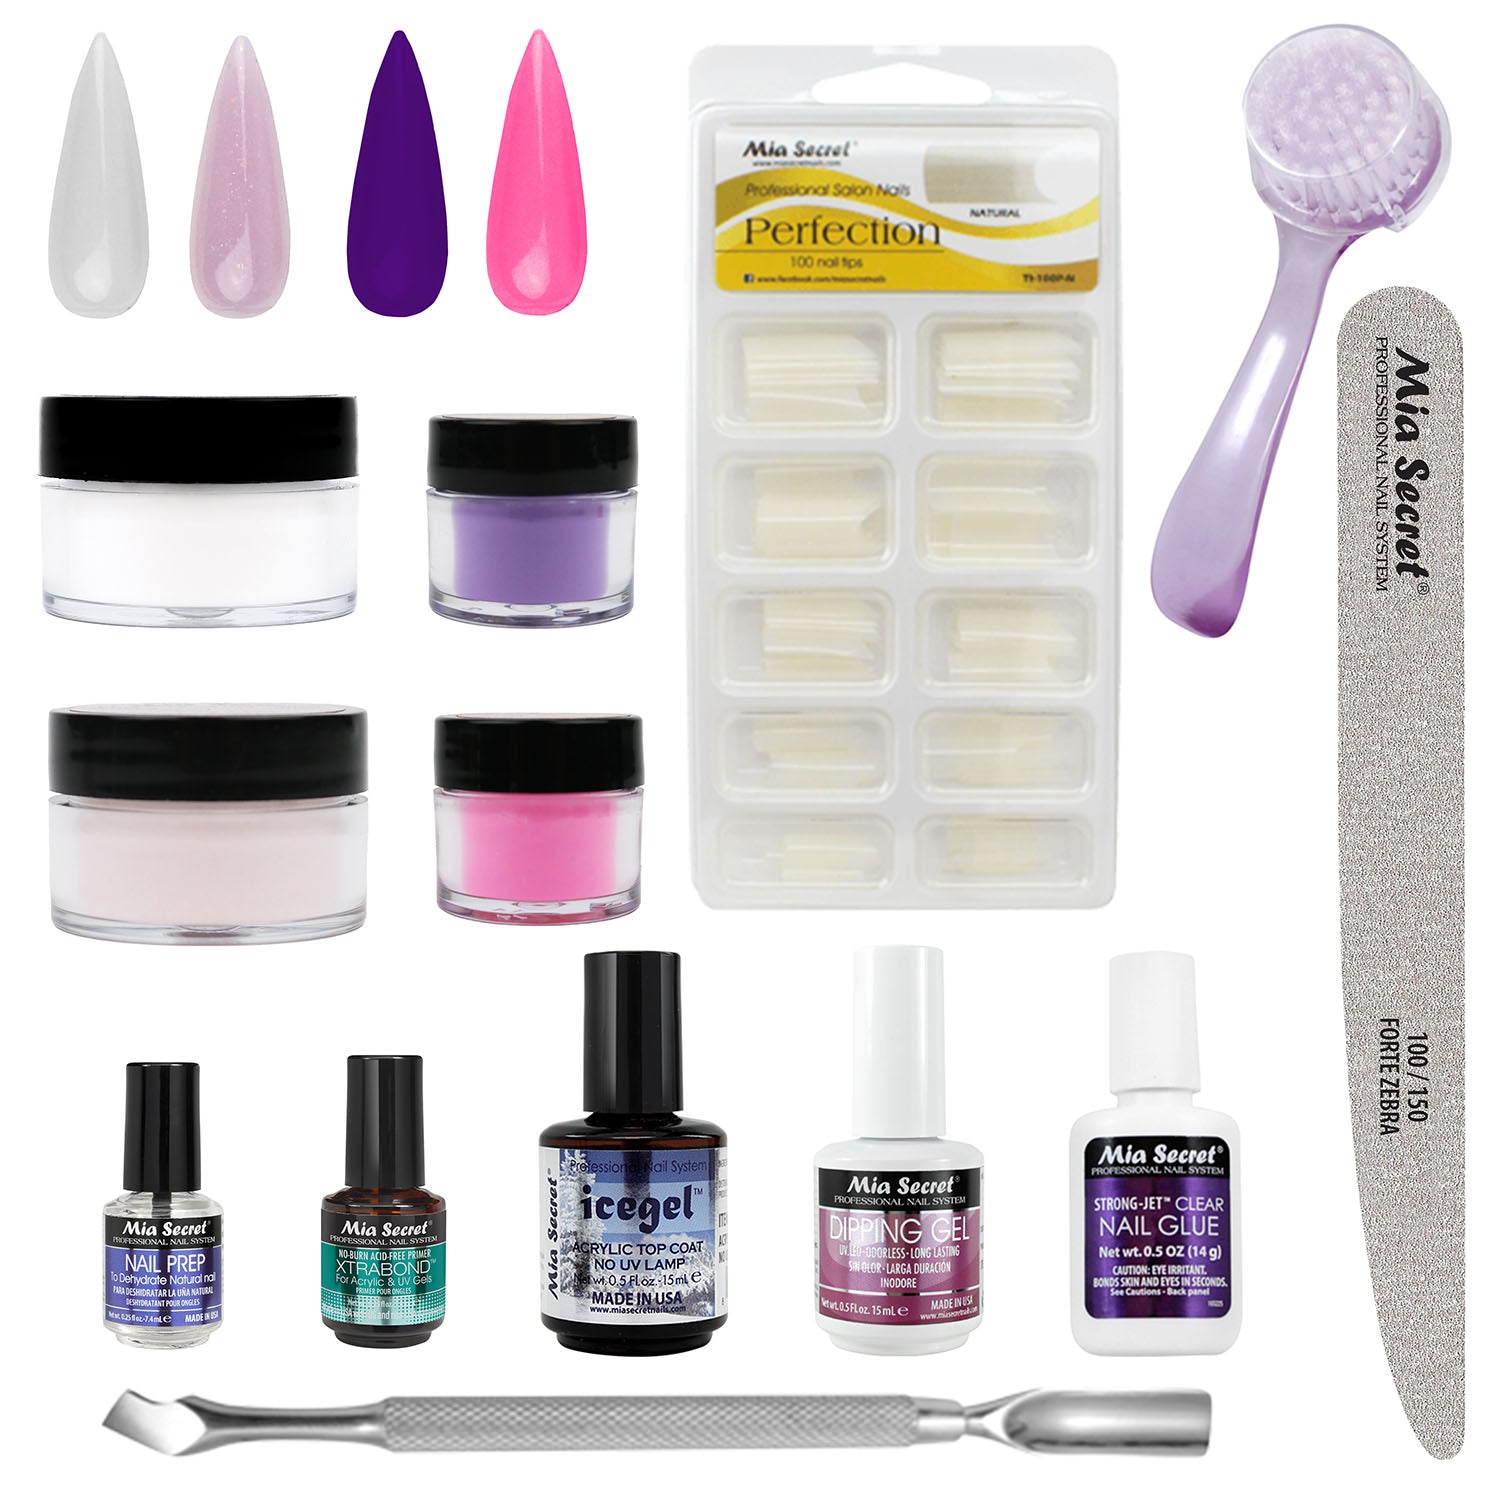 Amazon.com : KISS Salon Dip Powder Nail Kit Professional Dipping System  with Brush-On Gel, Dip Powder, Activator, 2 Brushes, Dipping Trough,  Cuticle Stick, Sponge, Nail File, & 40 Nail Tips : Beauty